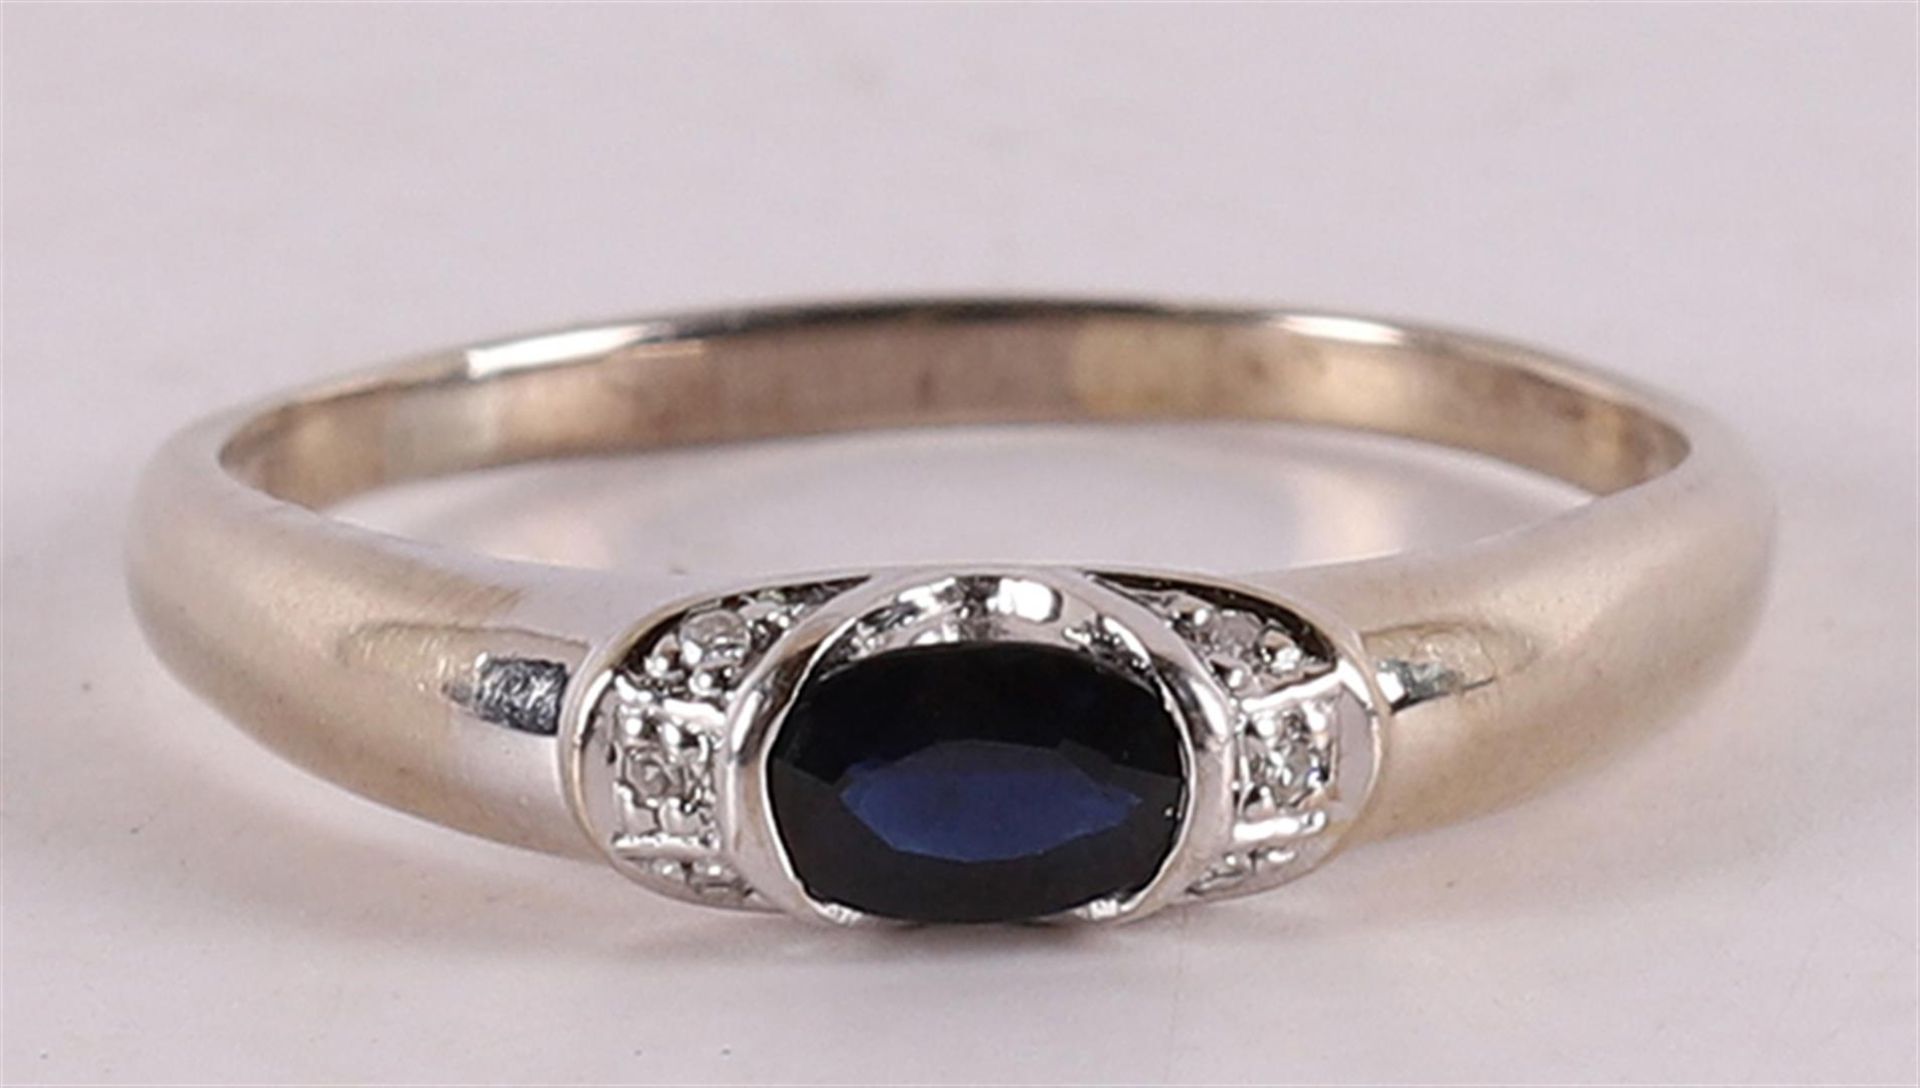 A 14 kt gold ring with an oval faceted blue sapphire and diamonds.